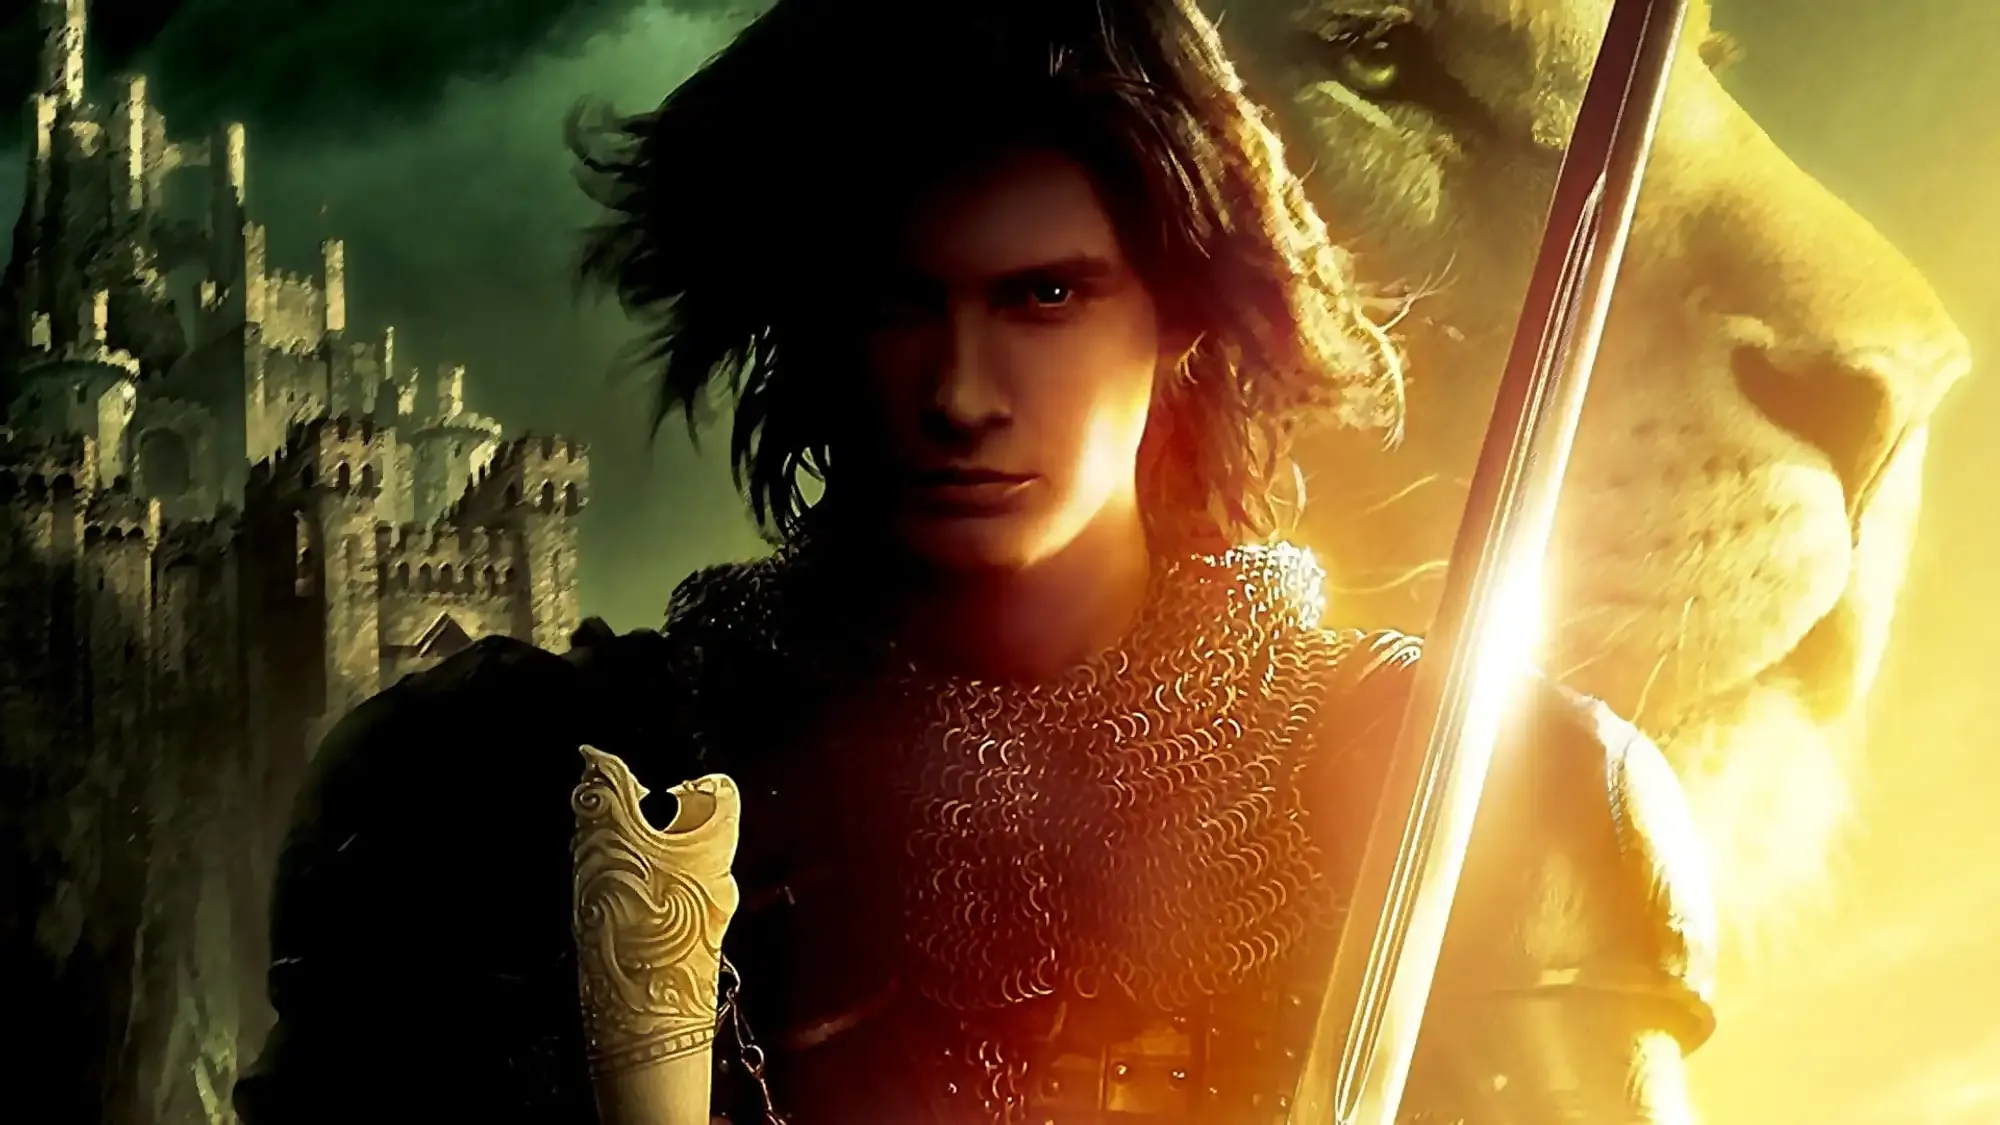 The Chronicles of Narnia: Prince Caspian movie review